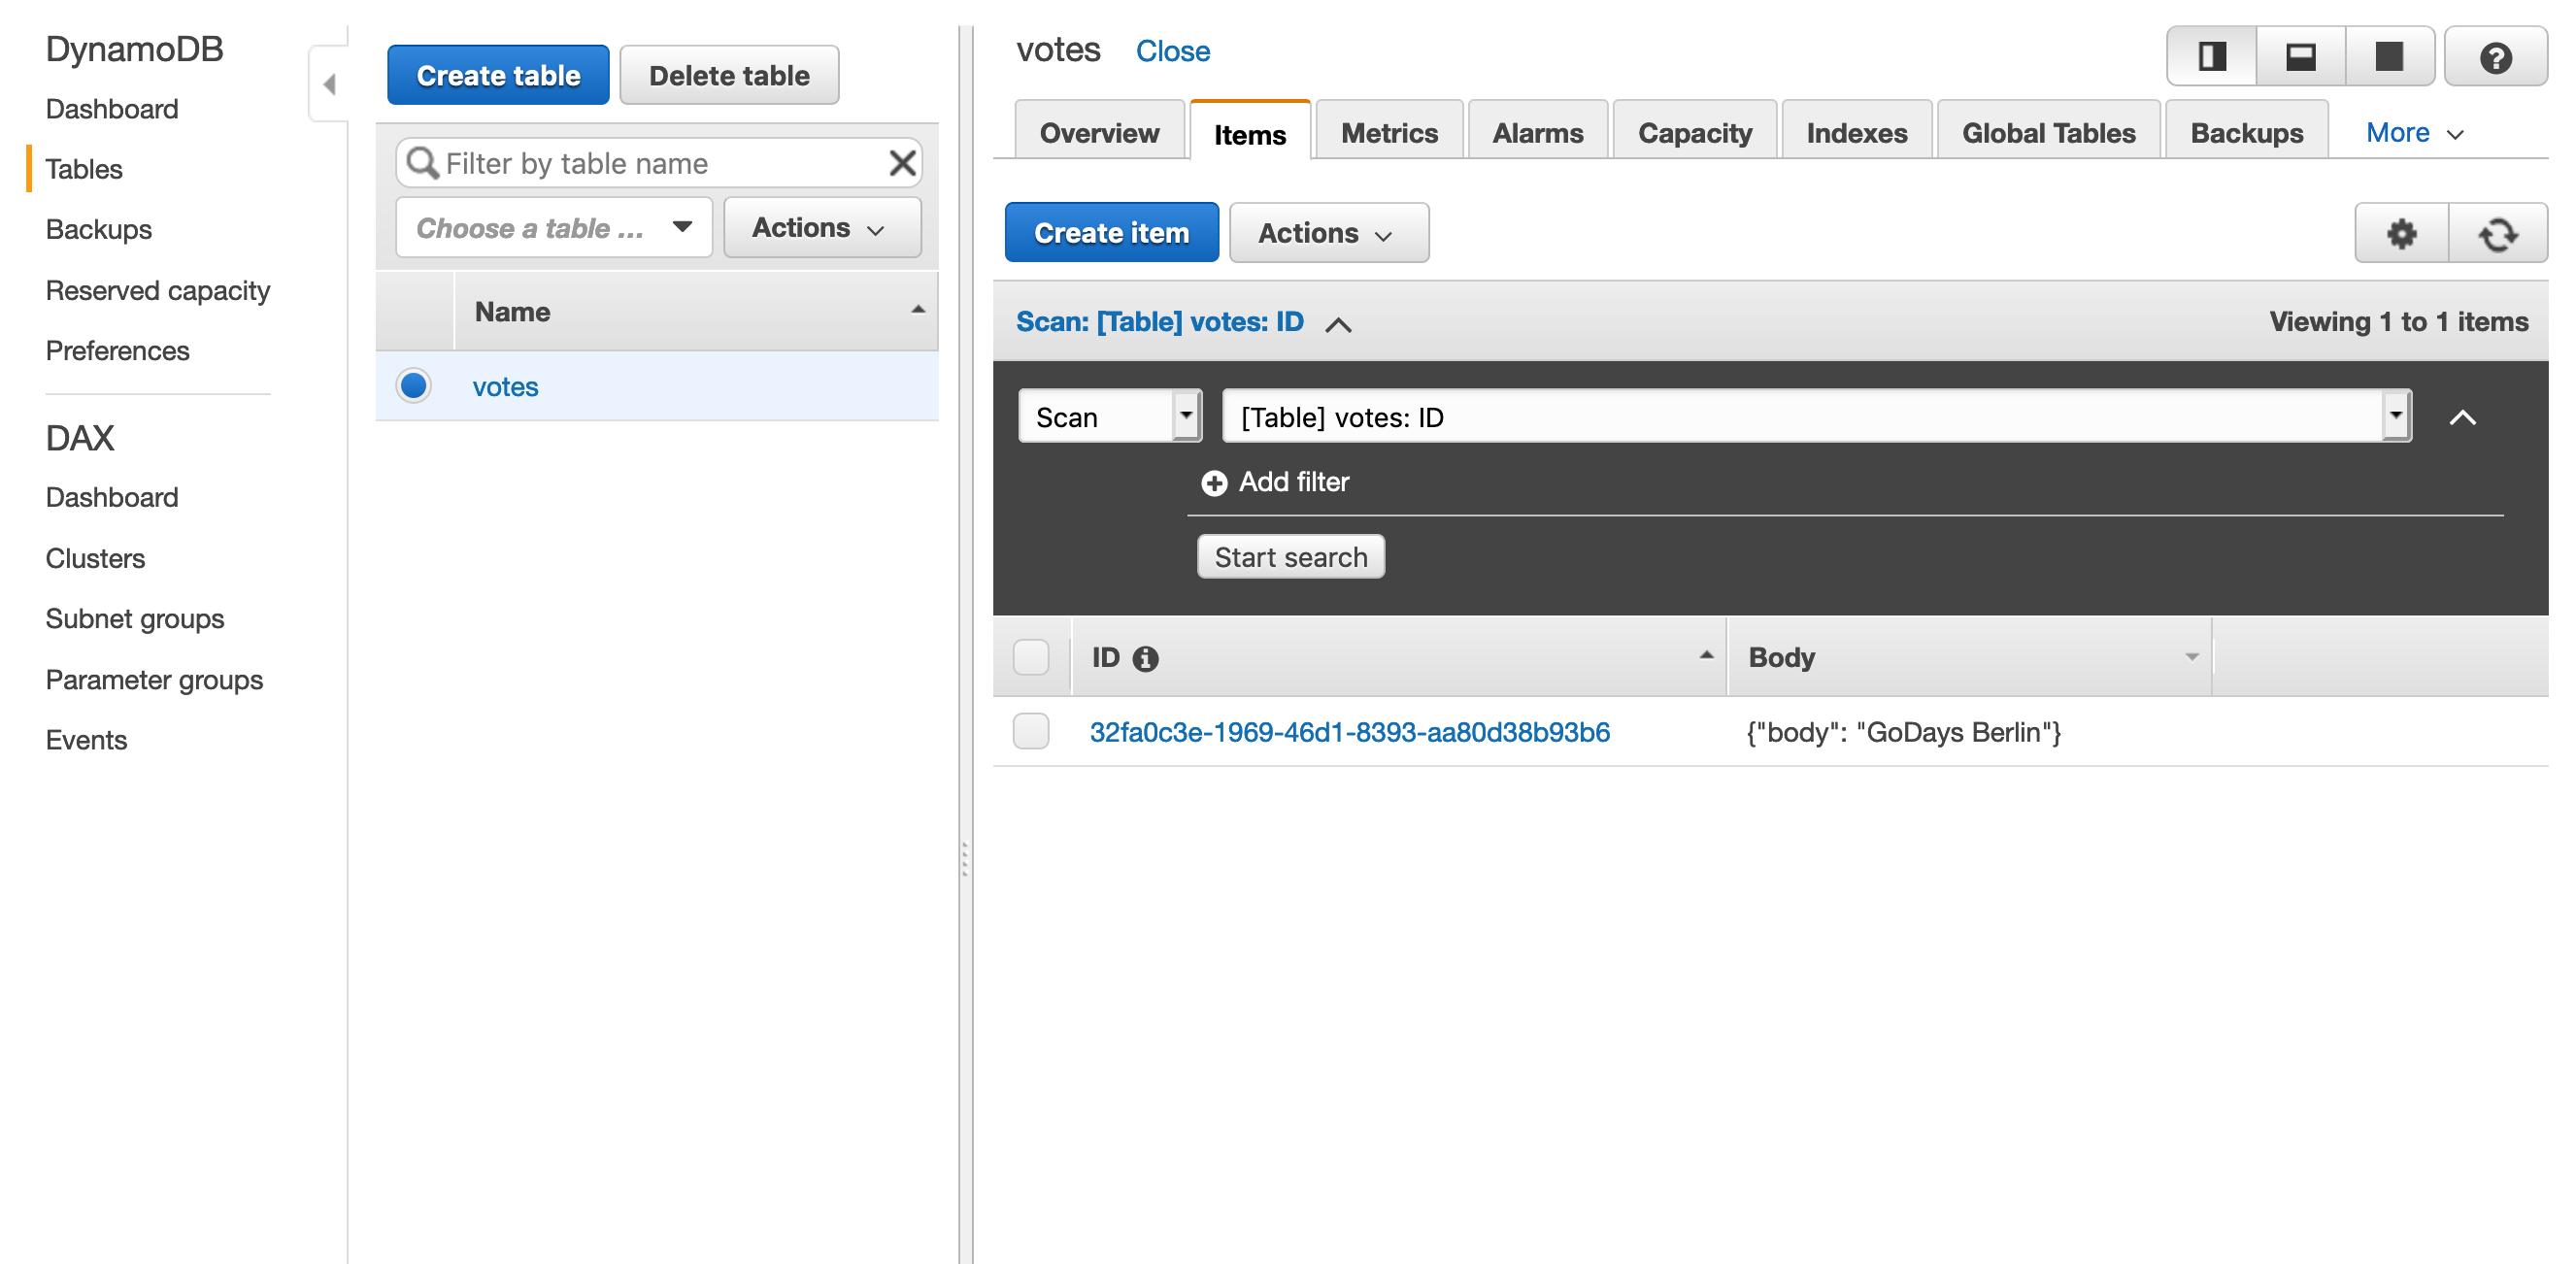 Screen capture of votes table in the DynamoDB console